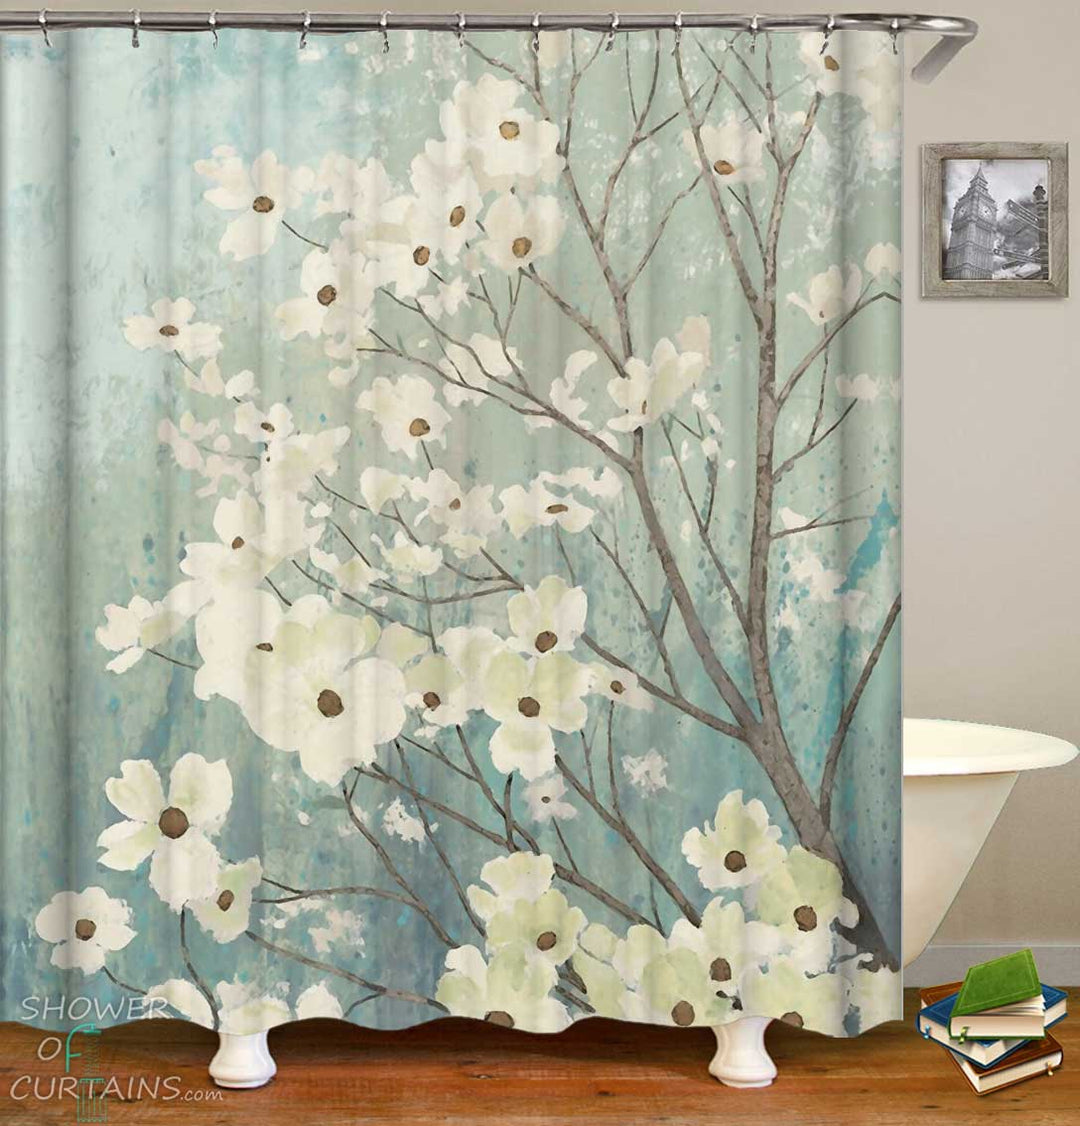 Shower Curtains with White Flowers Art Painting